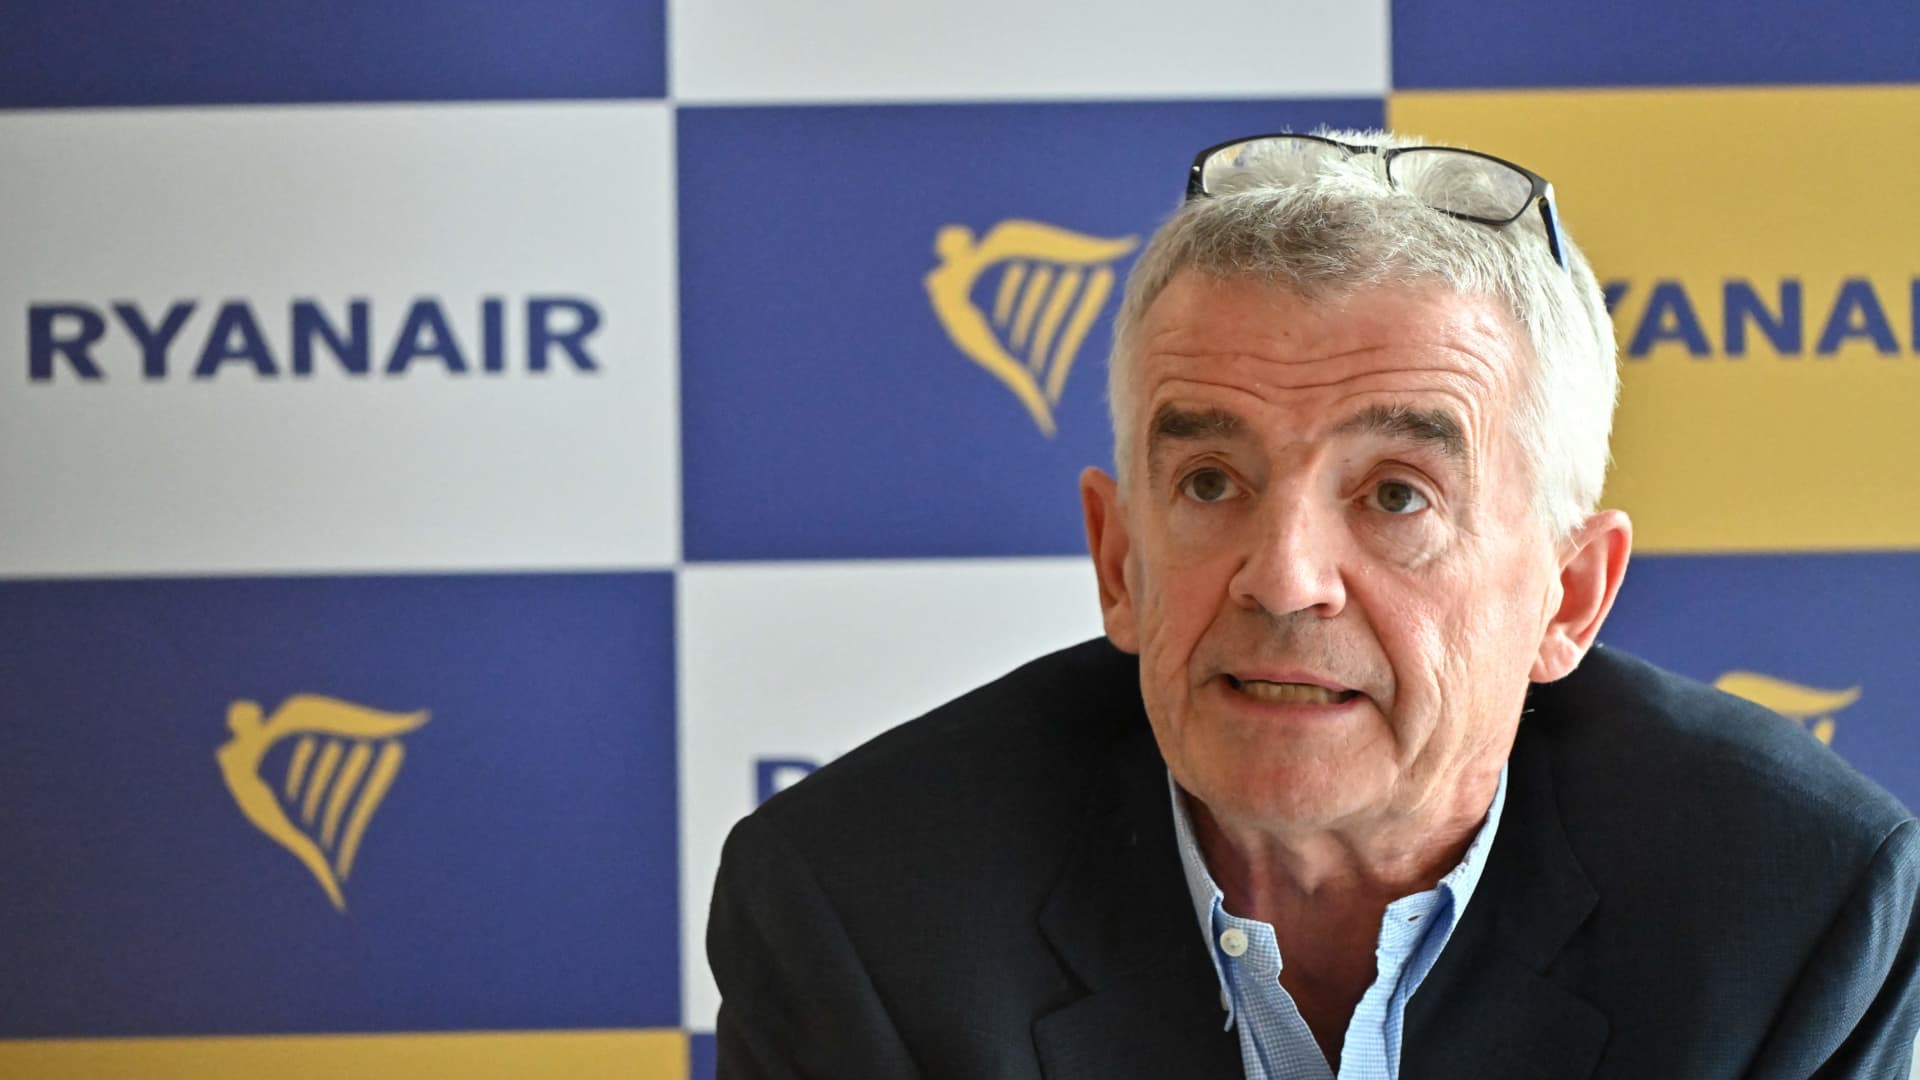 Airlines face fragile winter, Ryanair CEO says after record summer profits